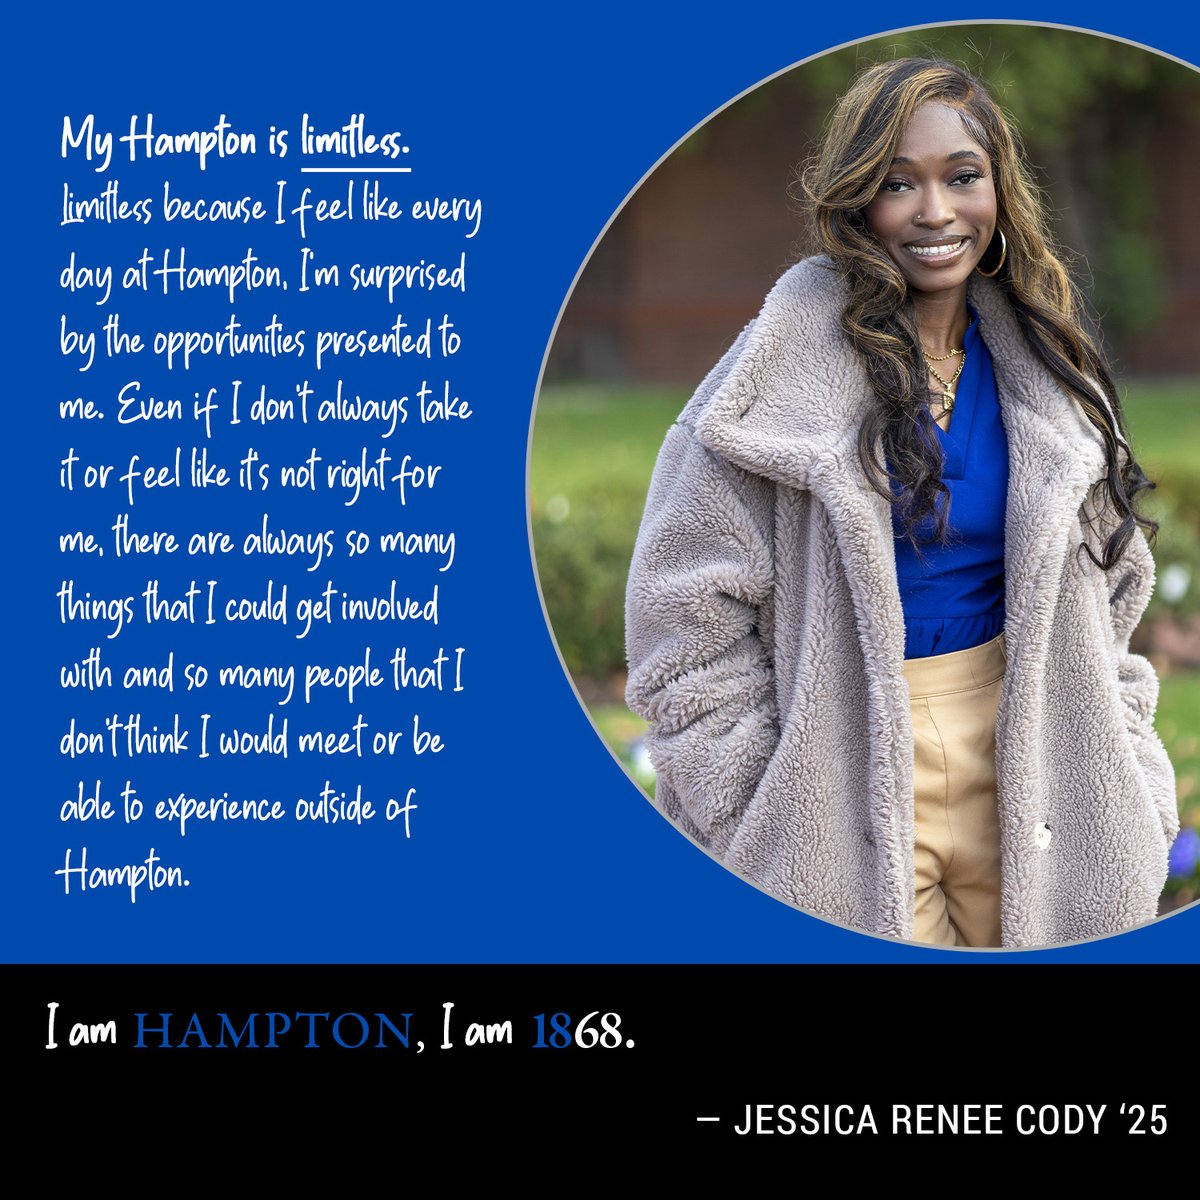 'My Hampton is Limitless!' - Jessica Rénee Cody

The end of Hampton University's fiscal year is approaching. Don't miss your opportunity to be the change in a student's life and make your giving count! Visit oaa.hamptonu.edu/1868 to start NOW!
#onehampton